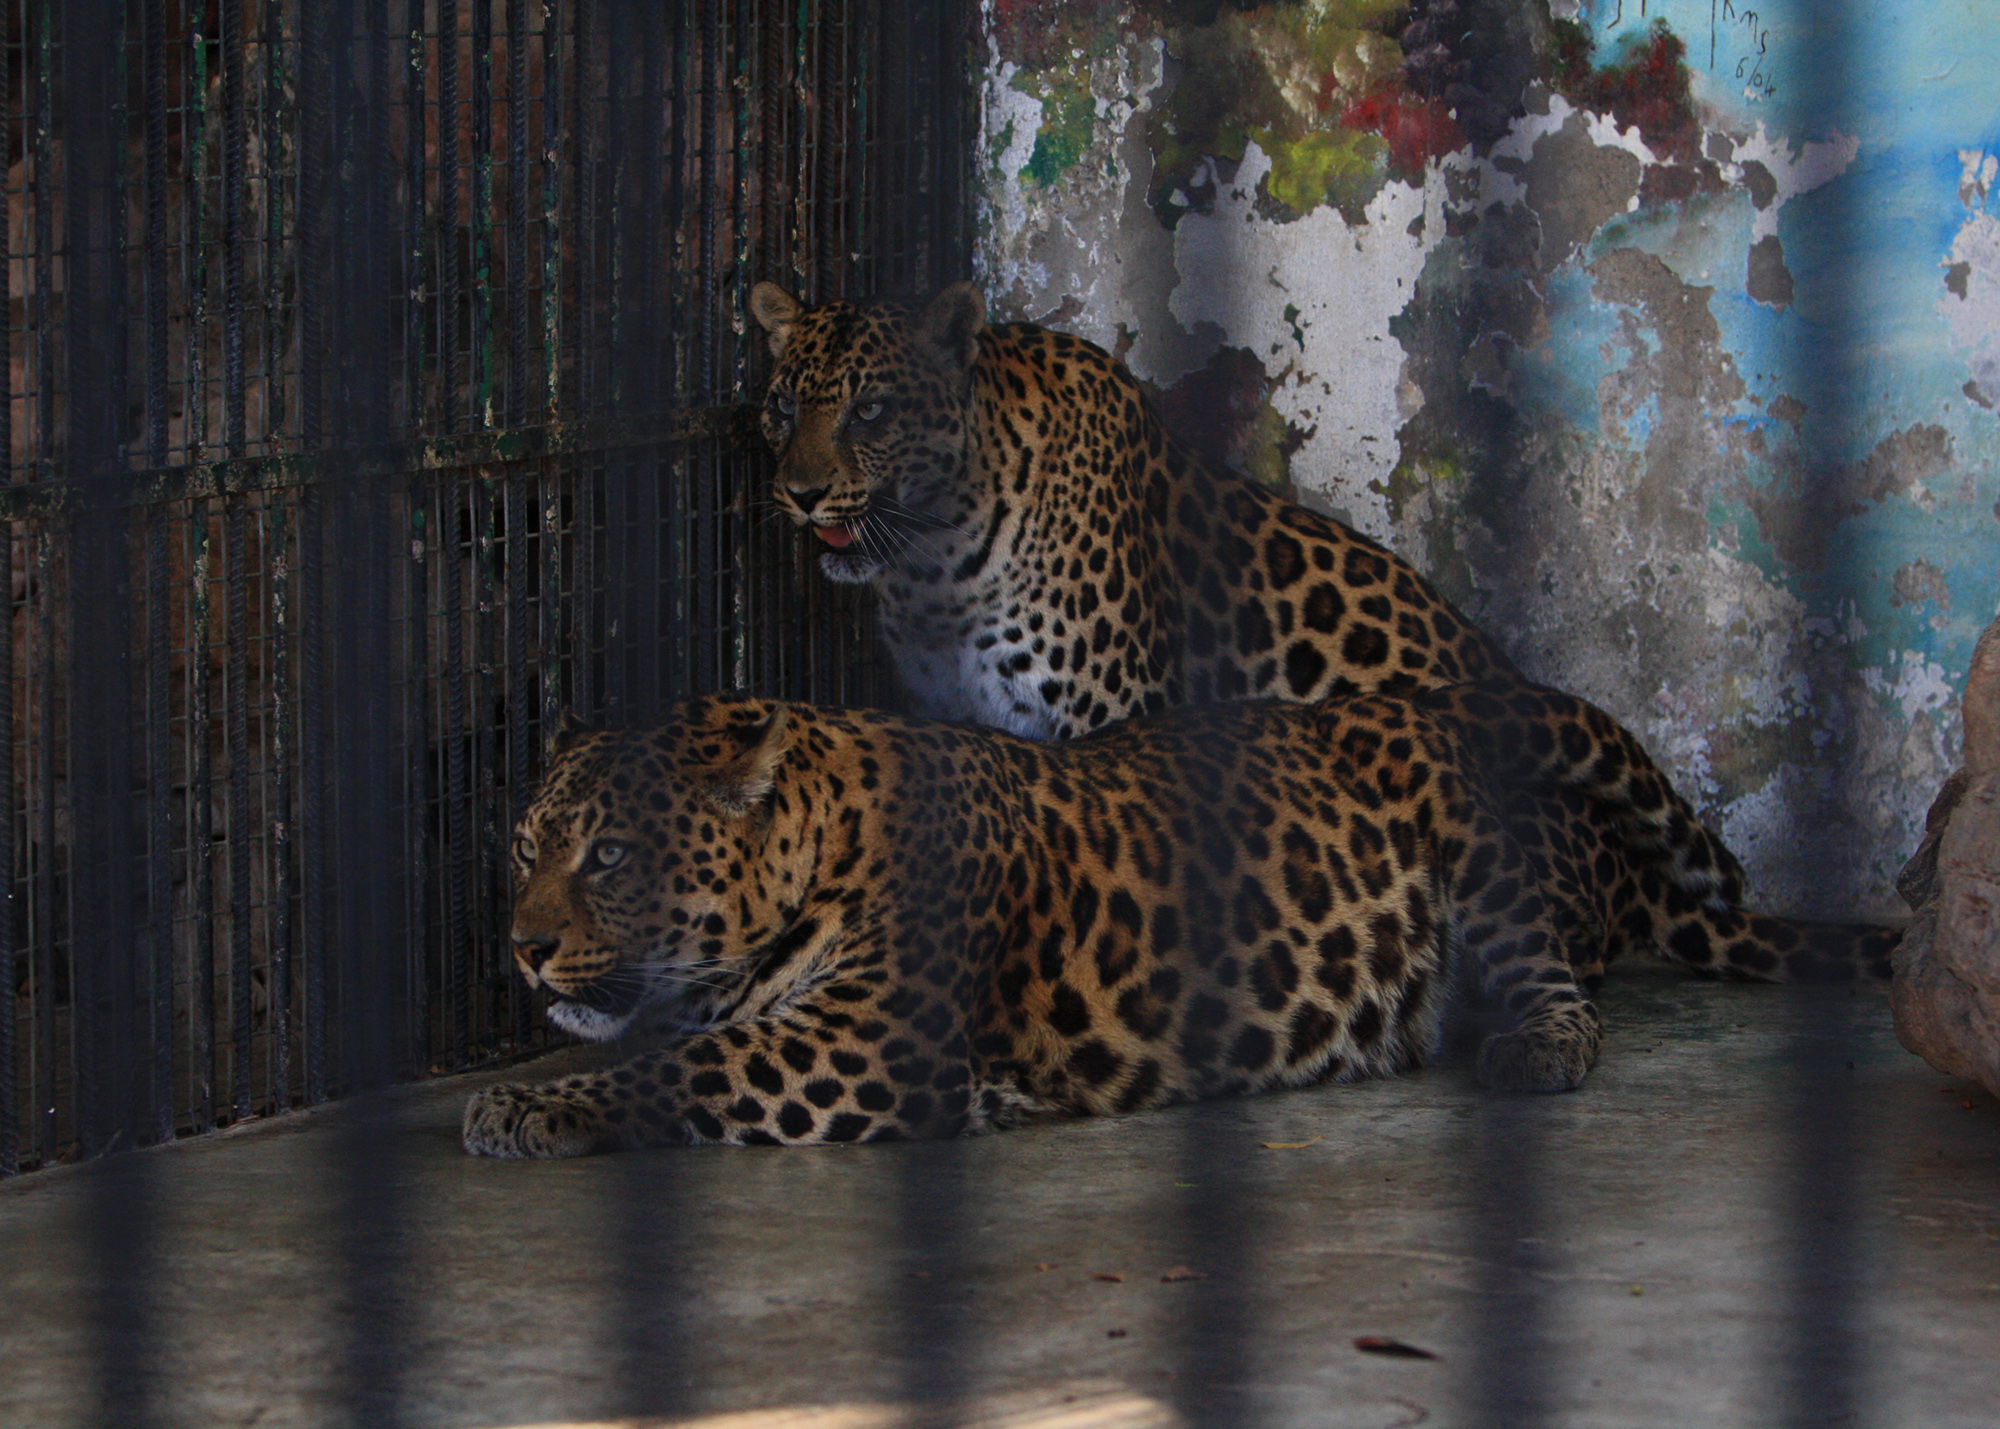 Two leopards lying on top of each other in captivity, behind bars in a small indoor enclosure